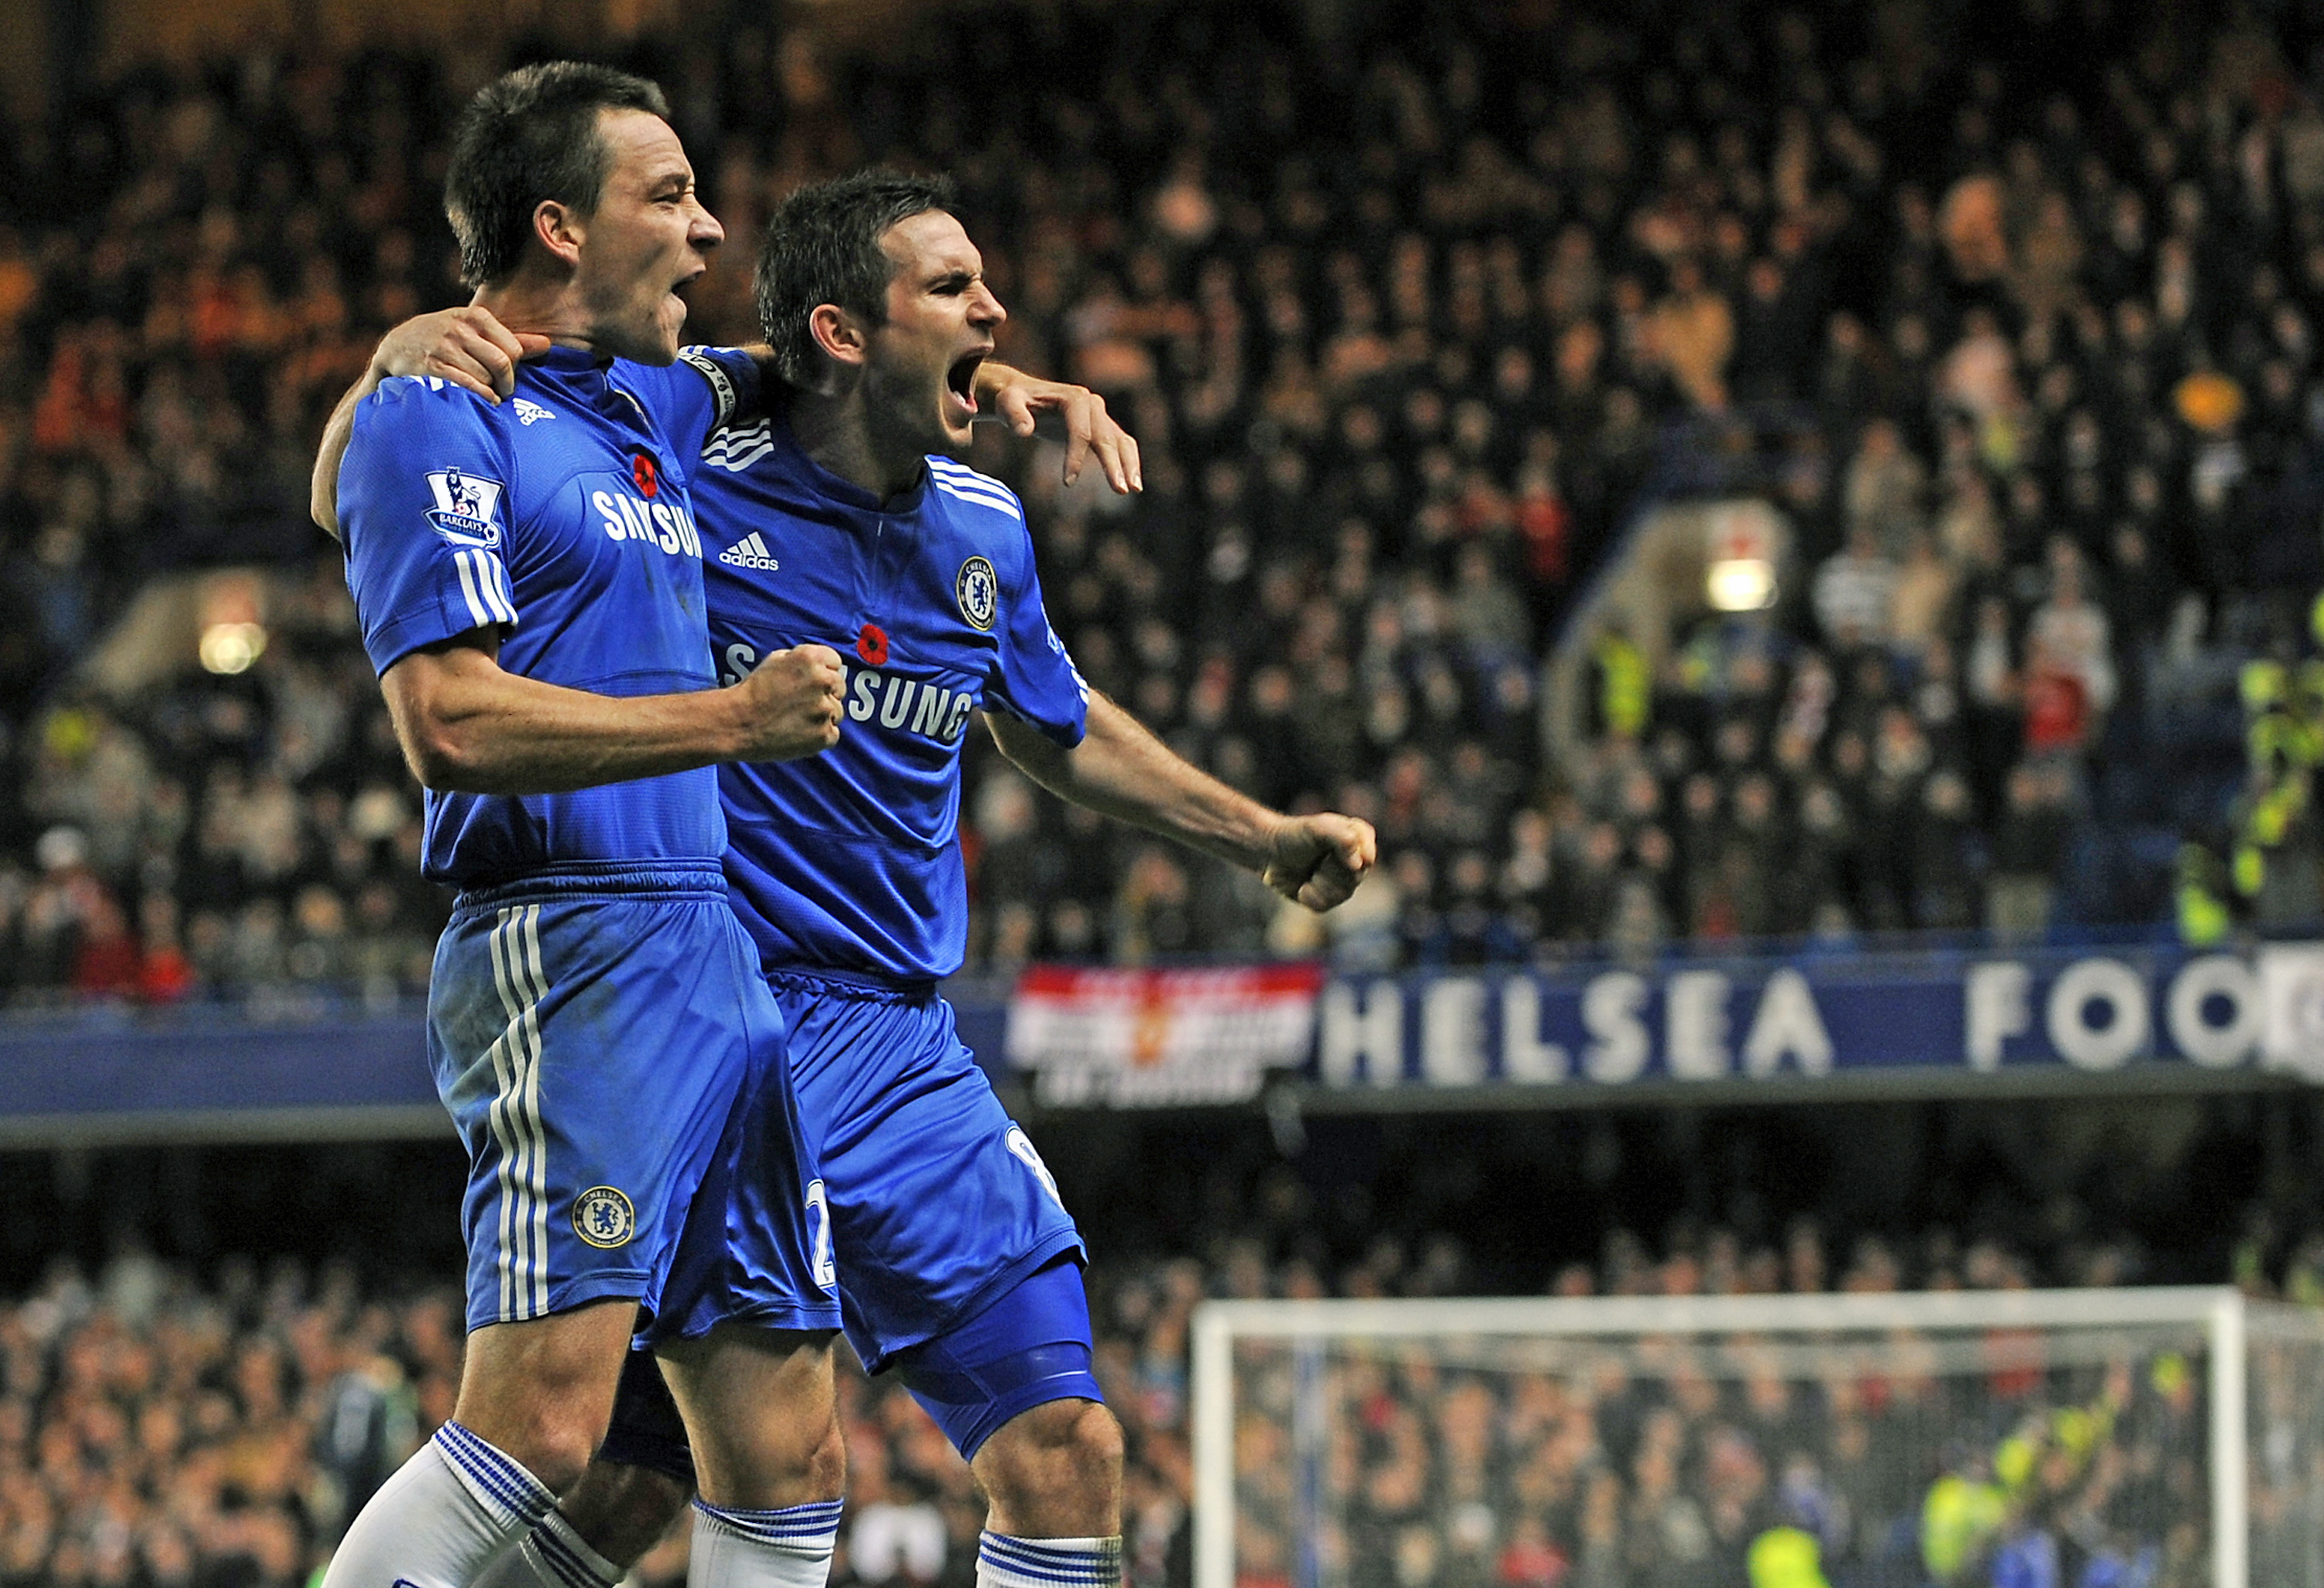 Chelsea captain John Terry (L) celebrates his goal with team-mate Frank Lampard (R) during the English Premier League footbal match between Chelsea and Manchester United at Stamford Bridge in London on November 8, 2009. AFP PHOTO / Adrian Dennis  FOR EDITORIAL USE ONLY Additional licence required for any commercial/promotional use or use on TV or internet (except identical online version of newspaper) of Premier League/Football League photos. Tel DataCo +44 207 2981656. Do not alter/modify photo. (Photo credit should read ADRIAN DENNIS/AFP/Getty Images)